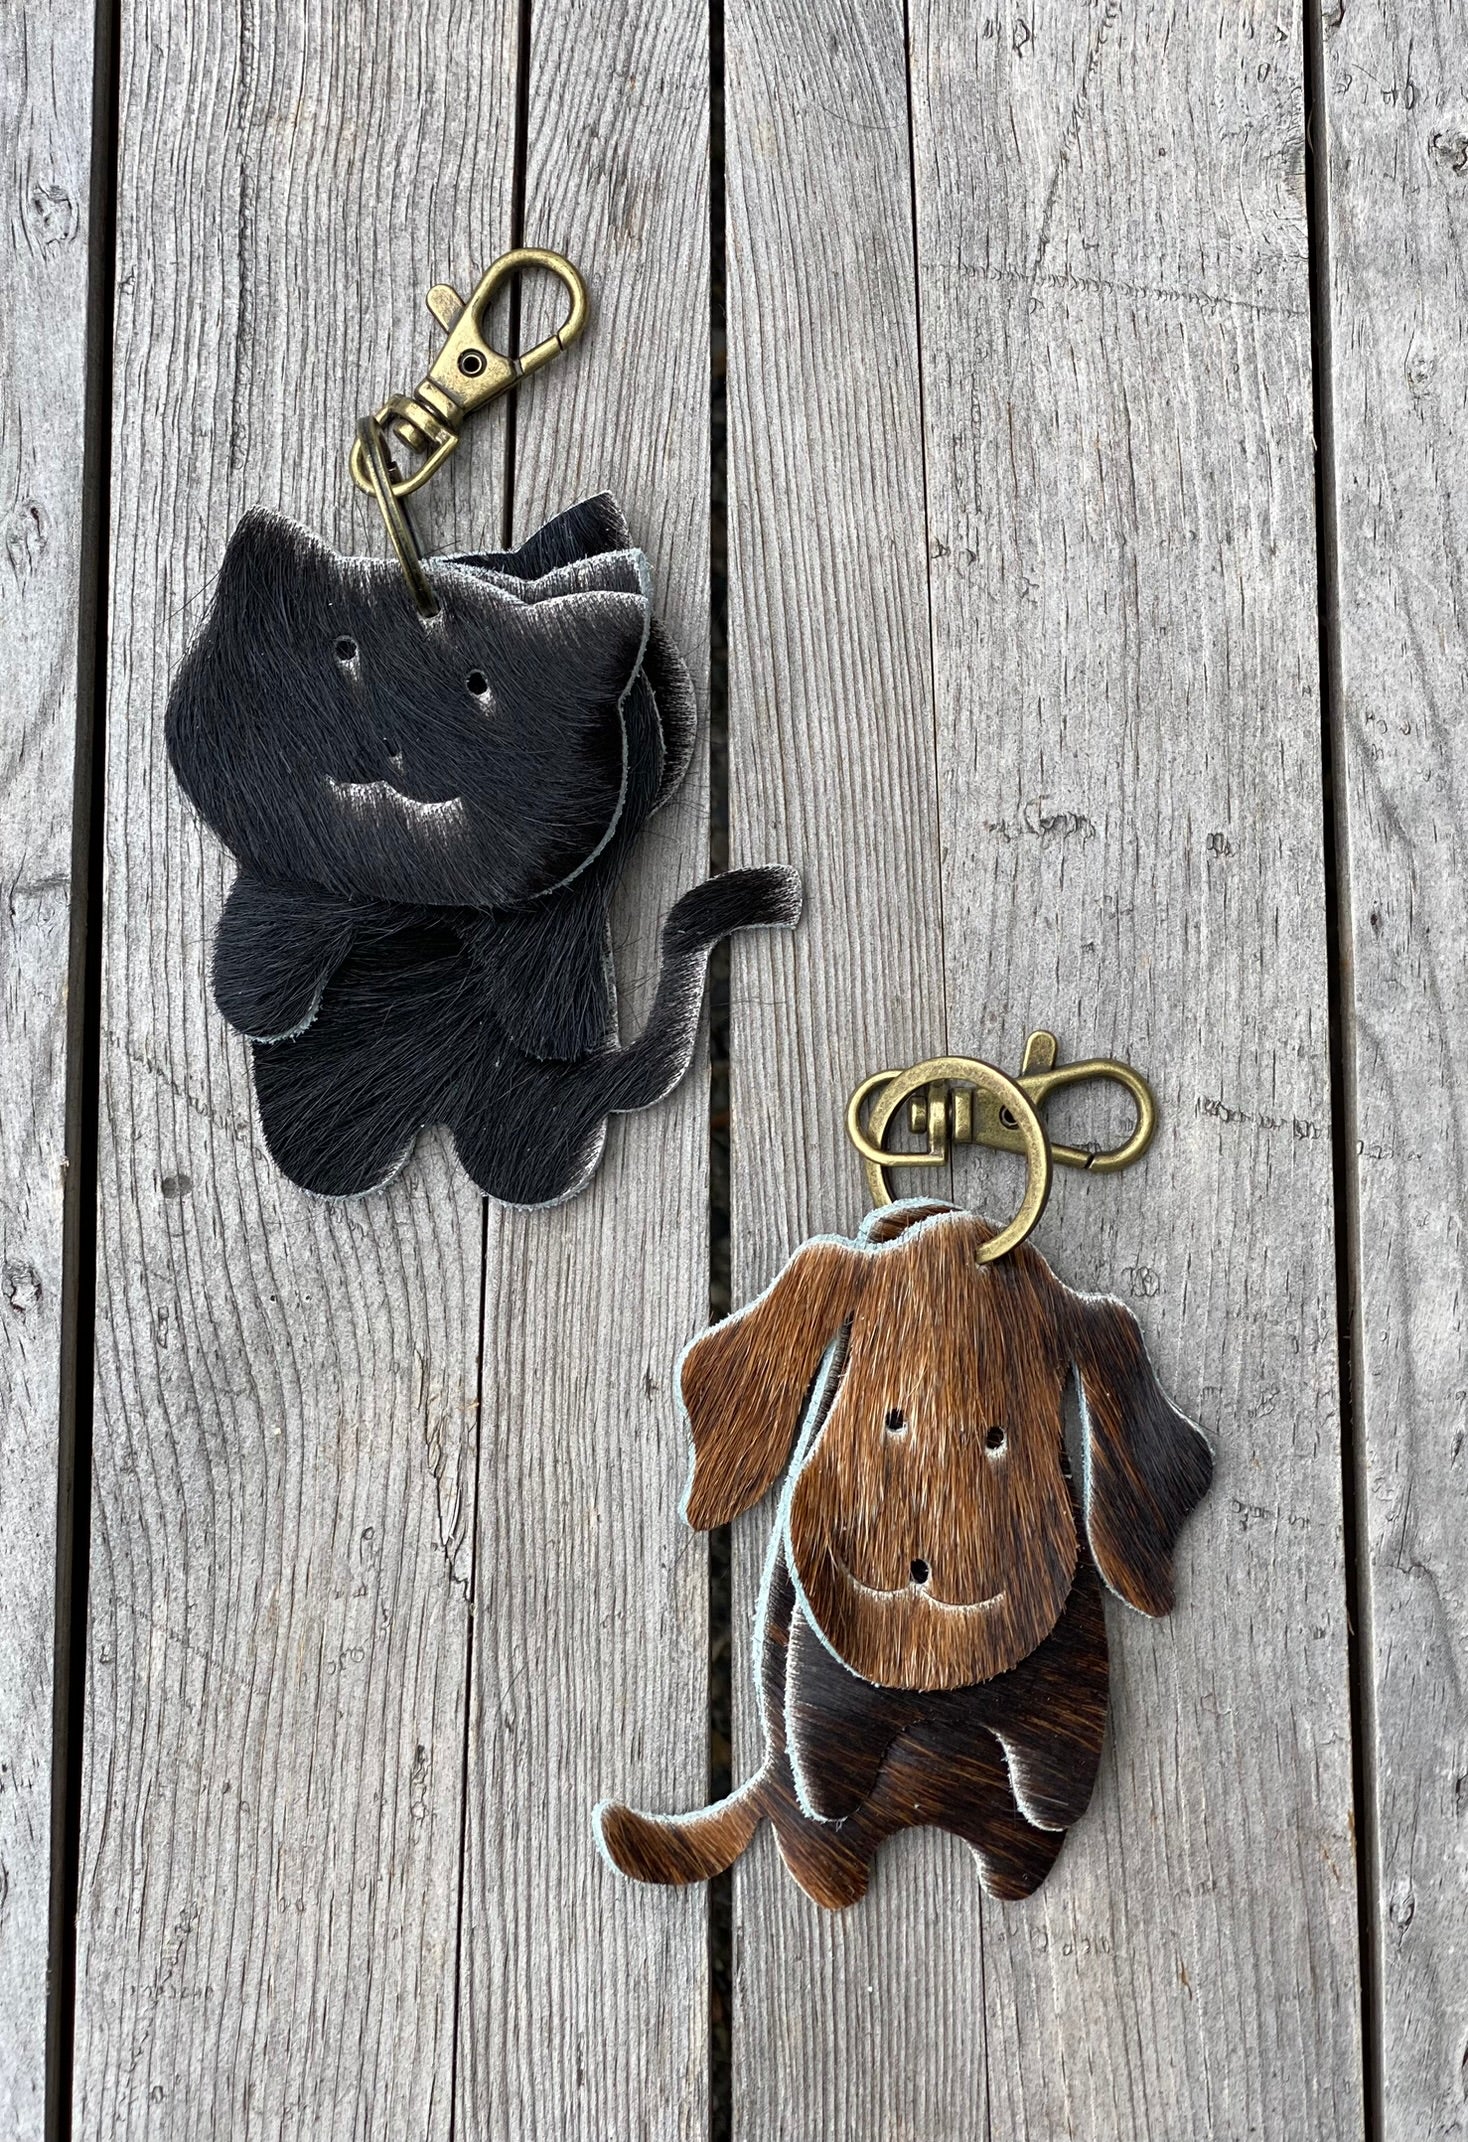 Hair on Cowhide Dog or Cat Keyring Purse Charm, Bag Clip on Dog or Cat Fob, Cute Dog or Cat Lovers Accessory